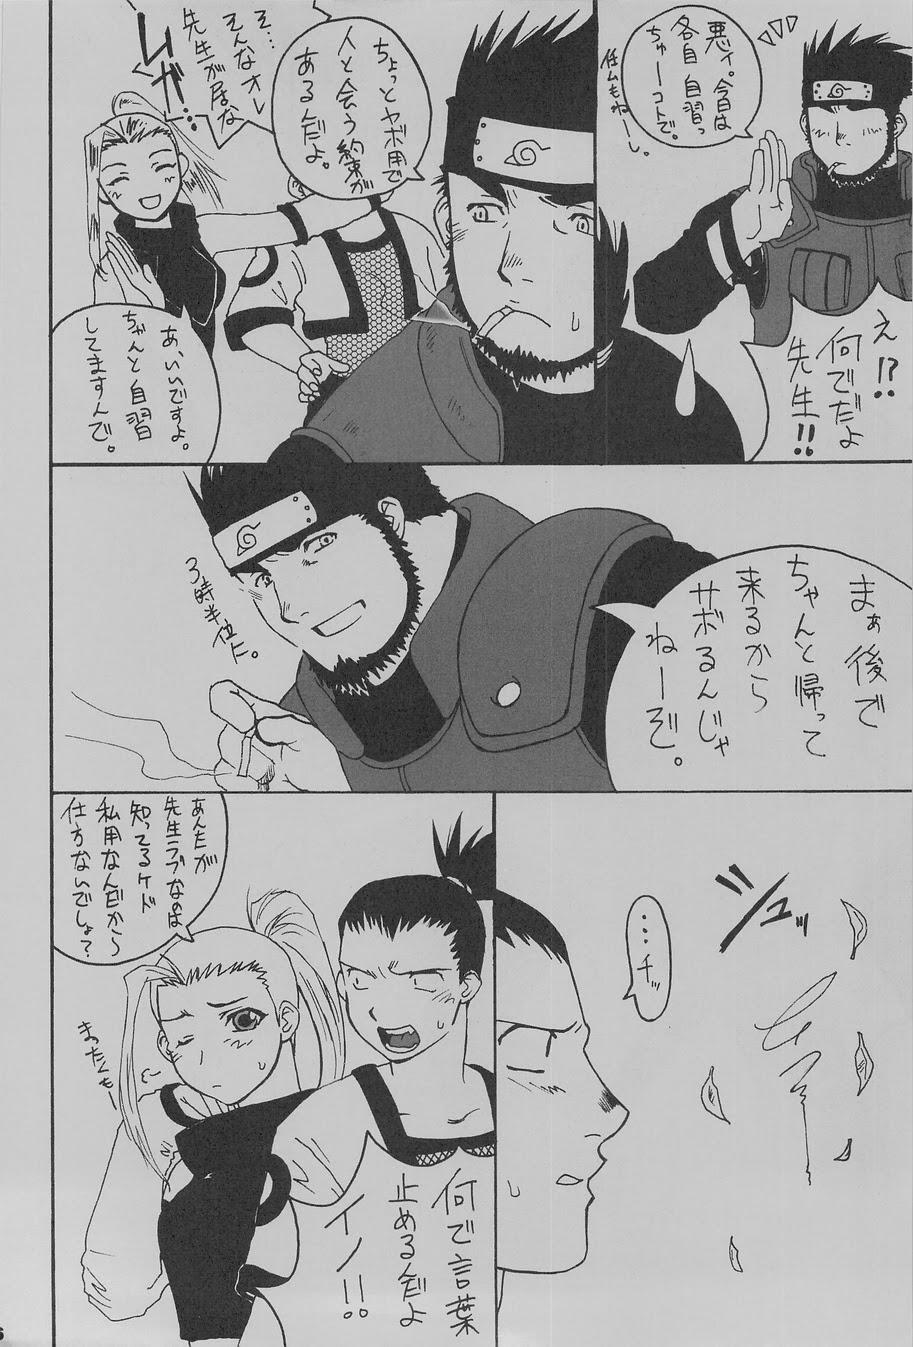 Pussy Lick Ka - it happened in the distant past - Naruto Fullmetal alchemist Gunparade march Staxxx - Page 8